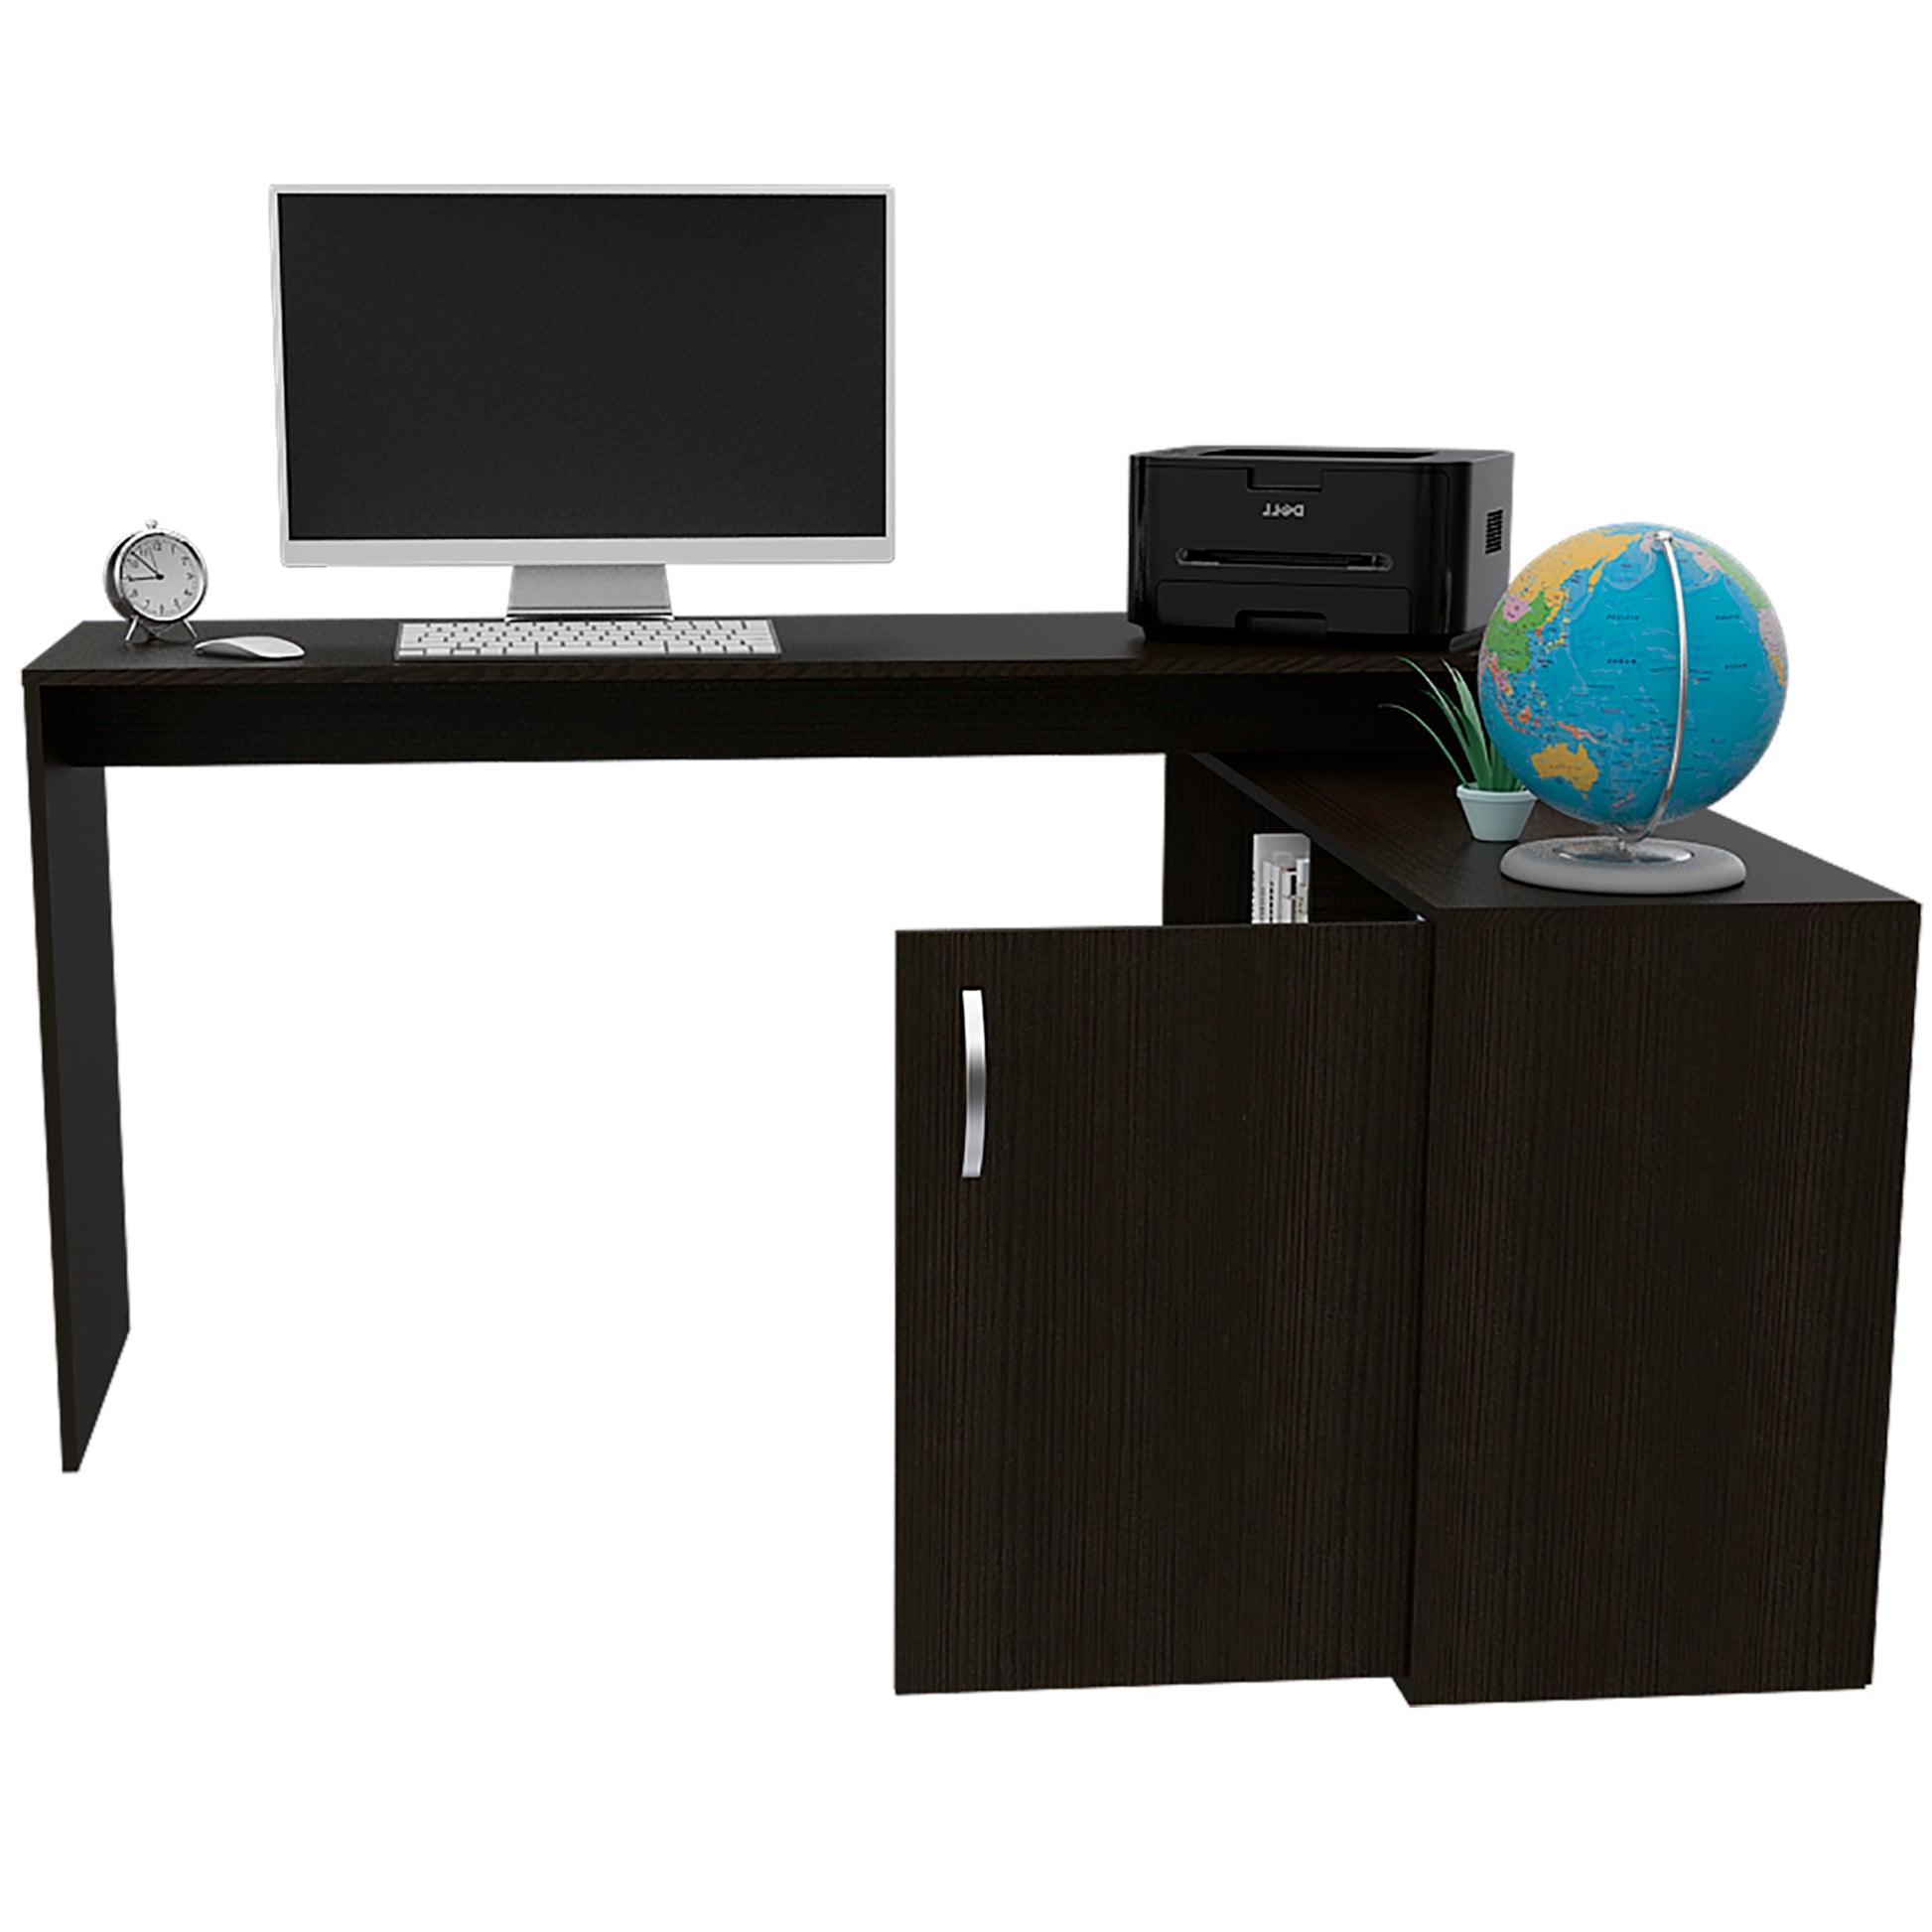 L-Shaped Computer Desk with Open & Closed Storages -Black